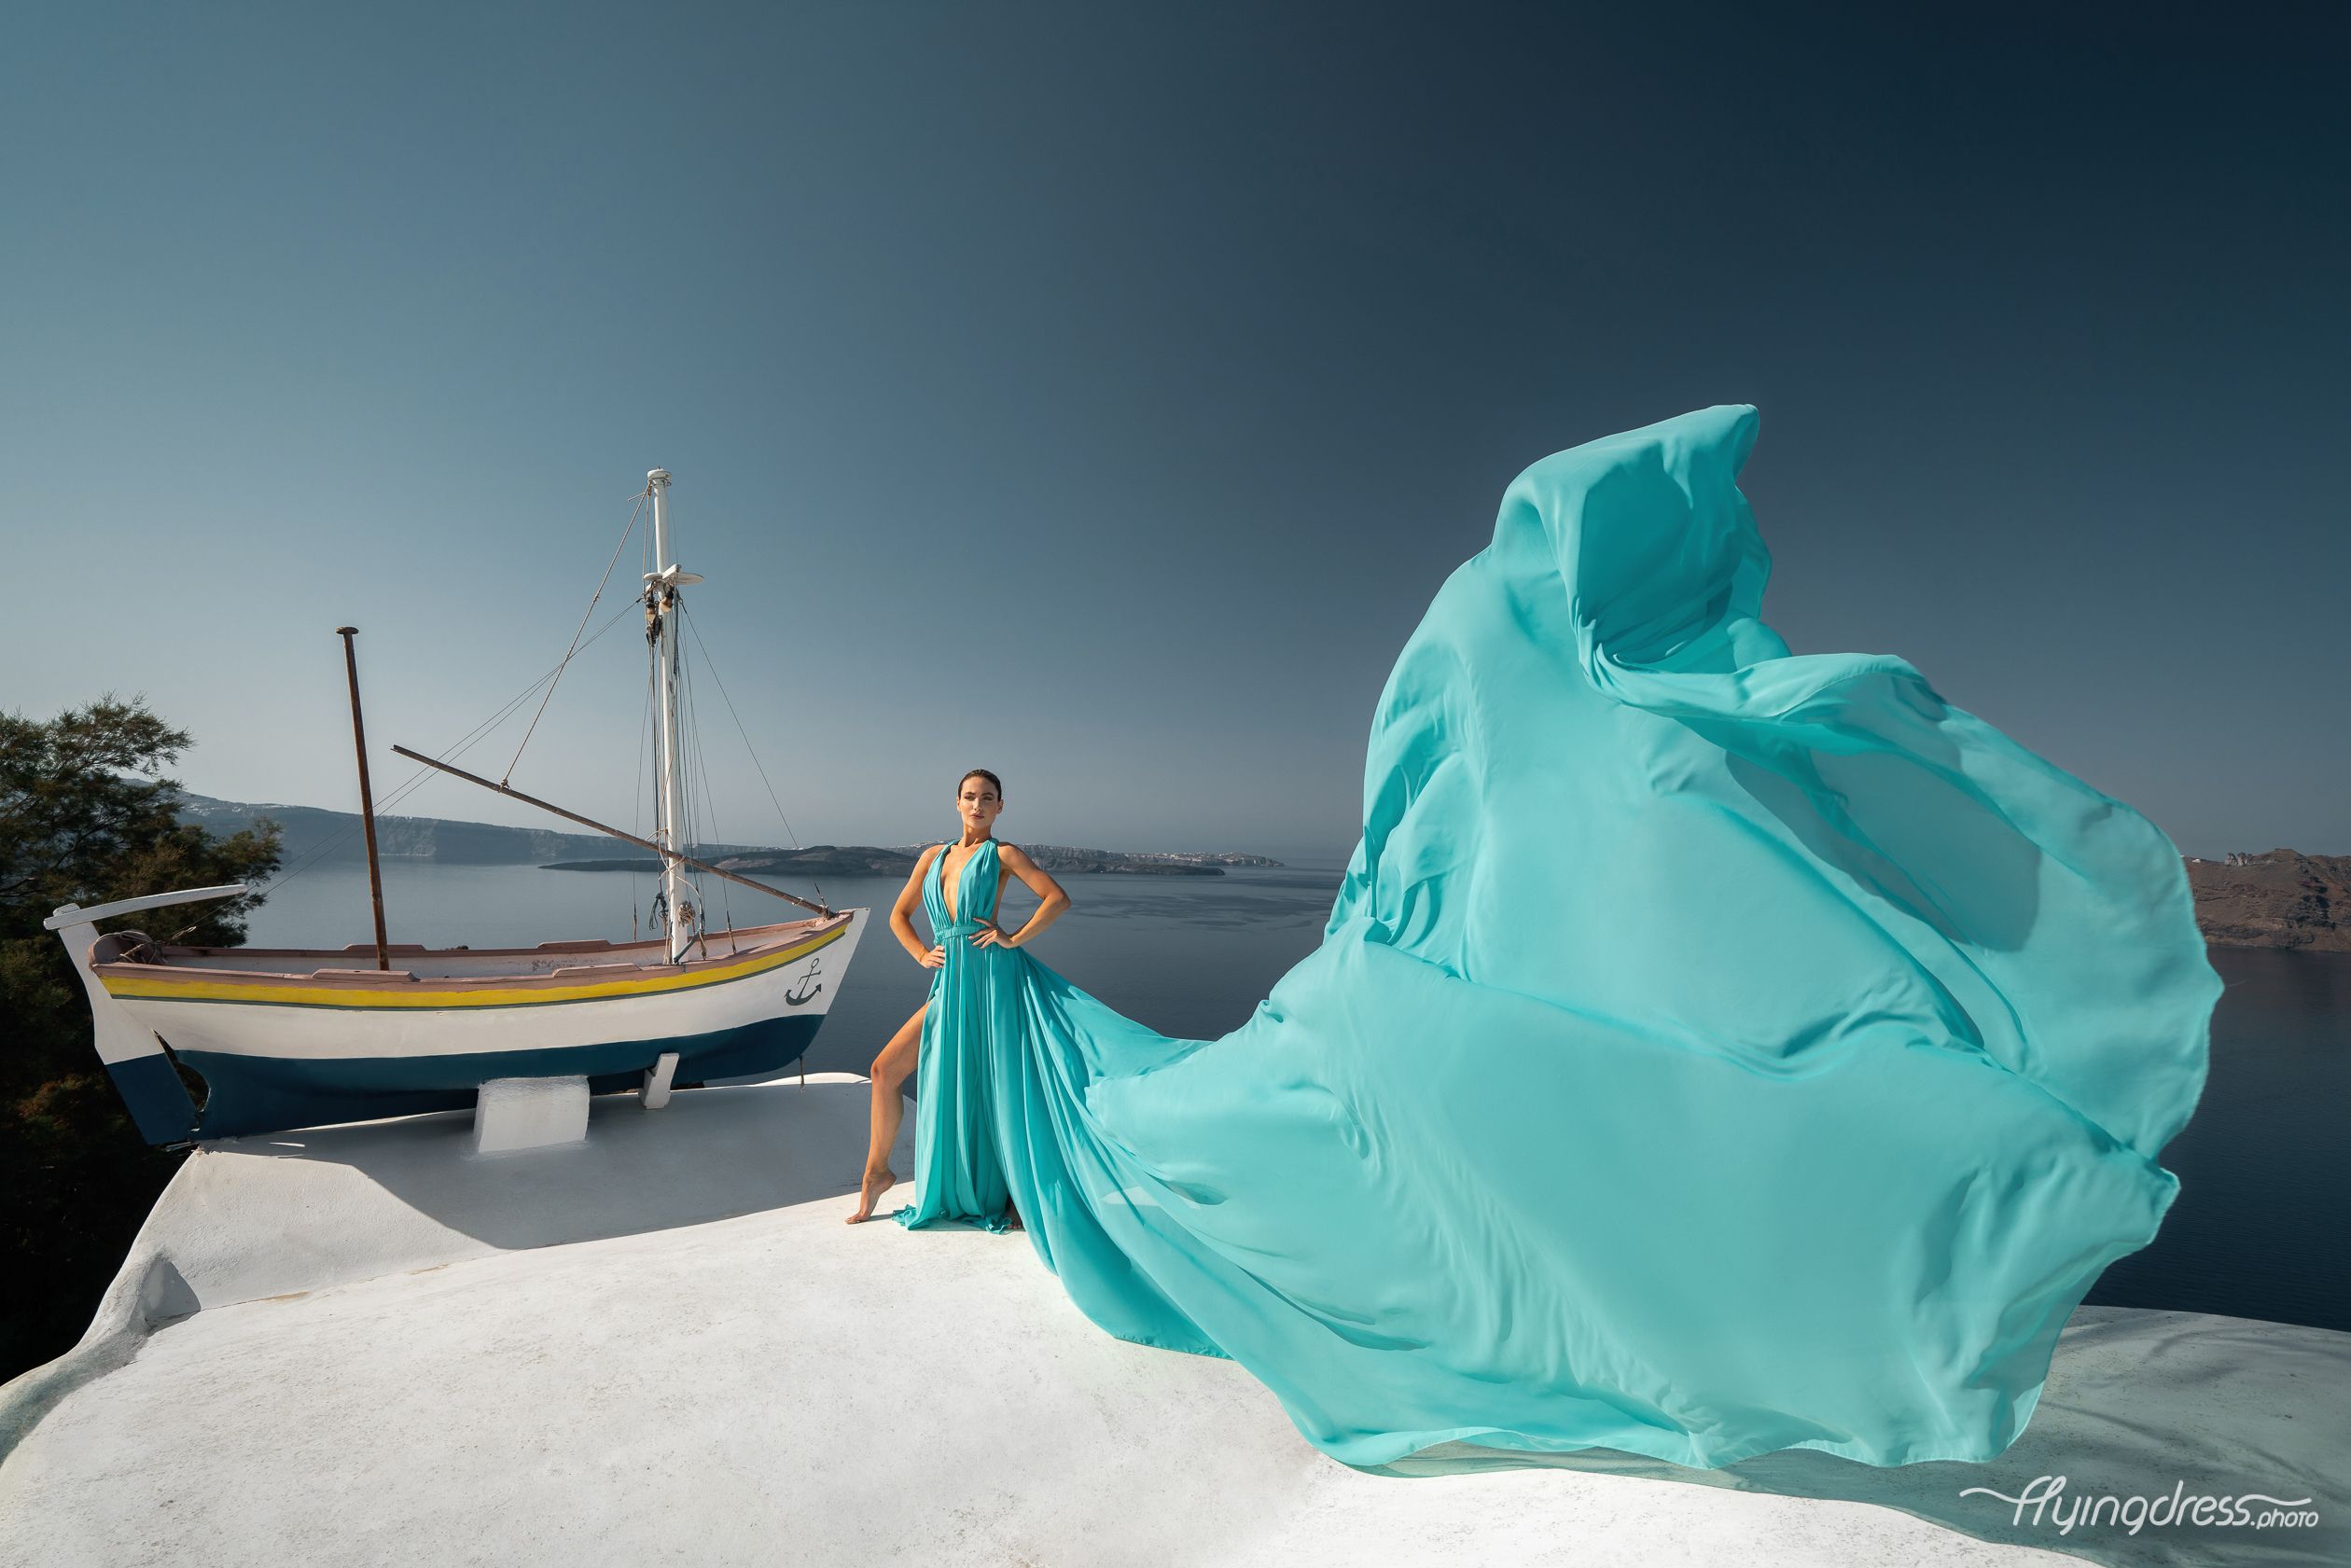 Photoshoot in Oia village with a tiffany blue flying dress